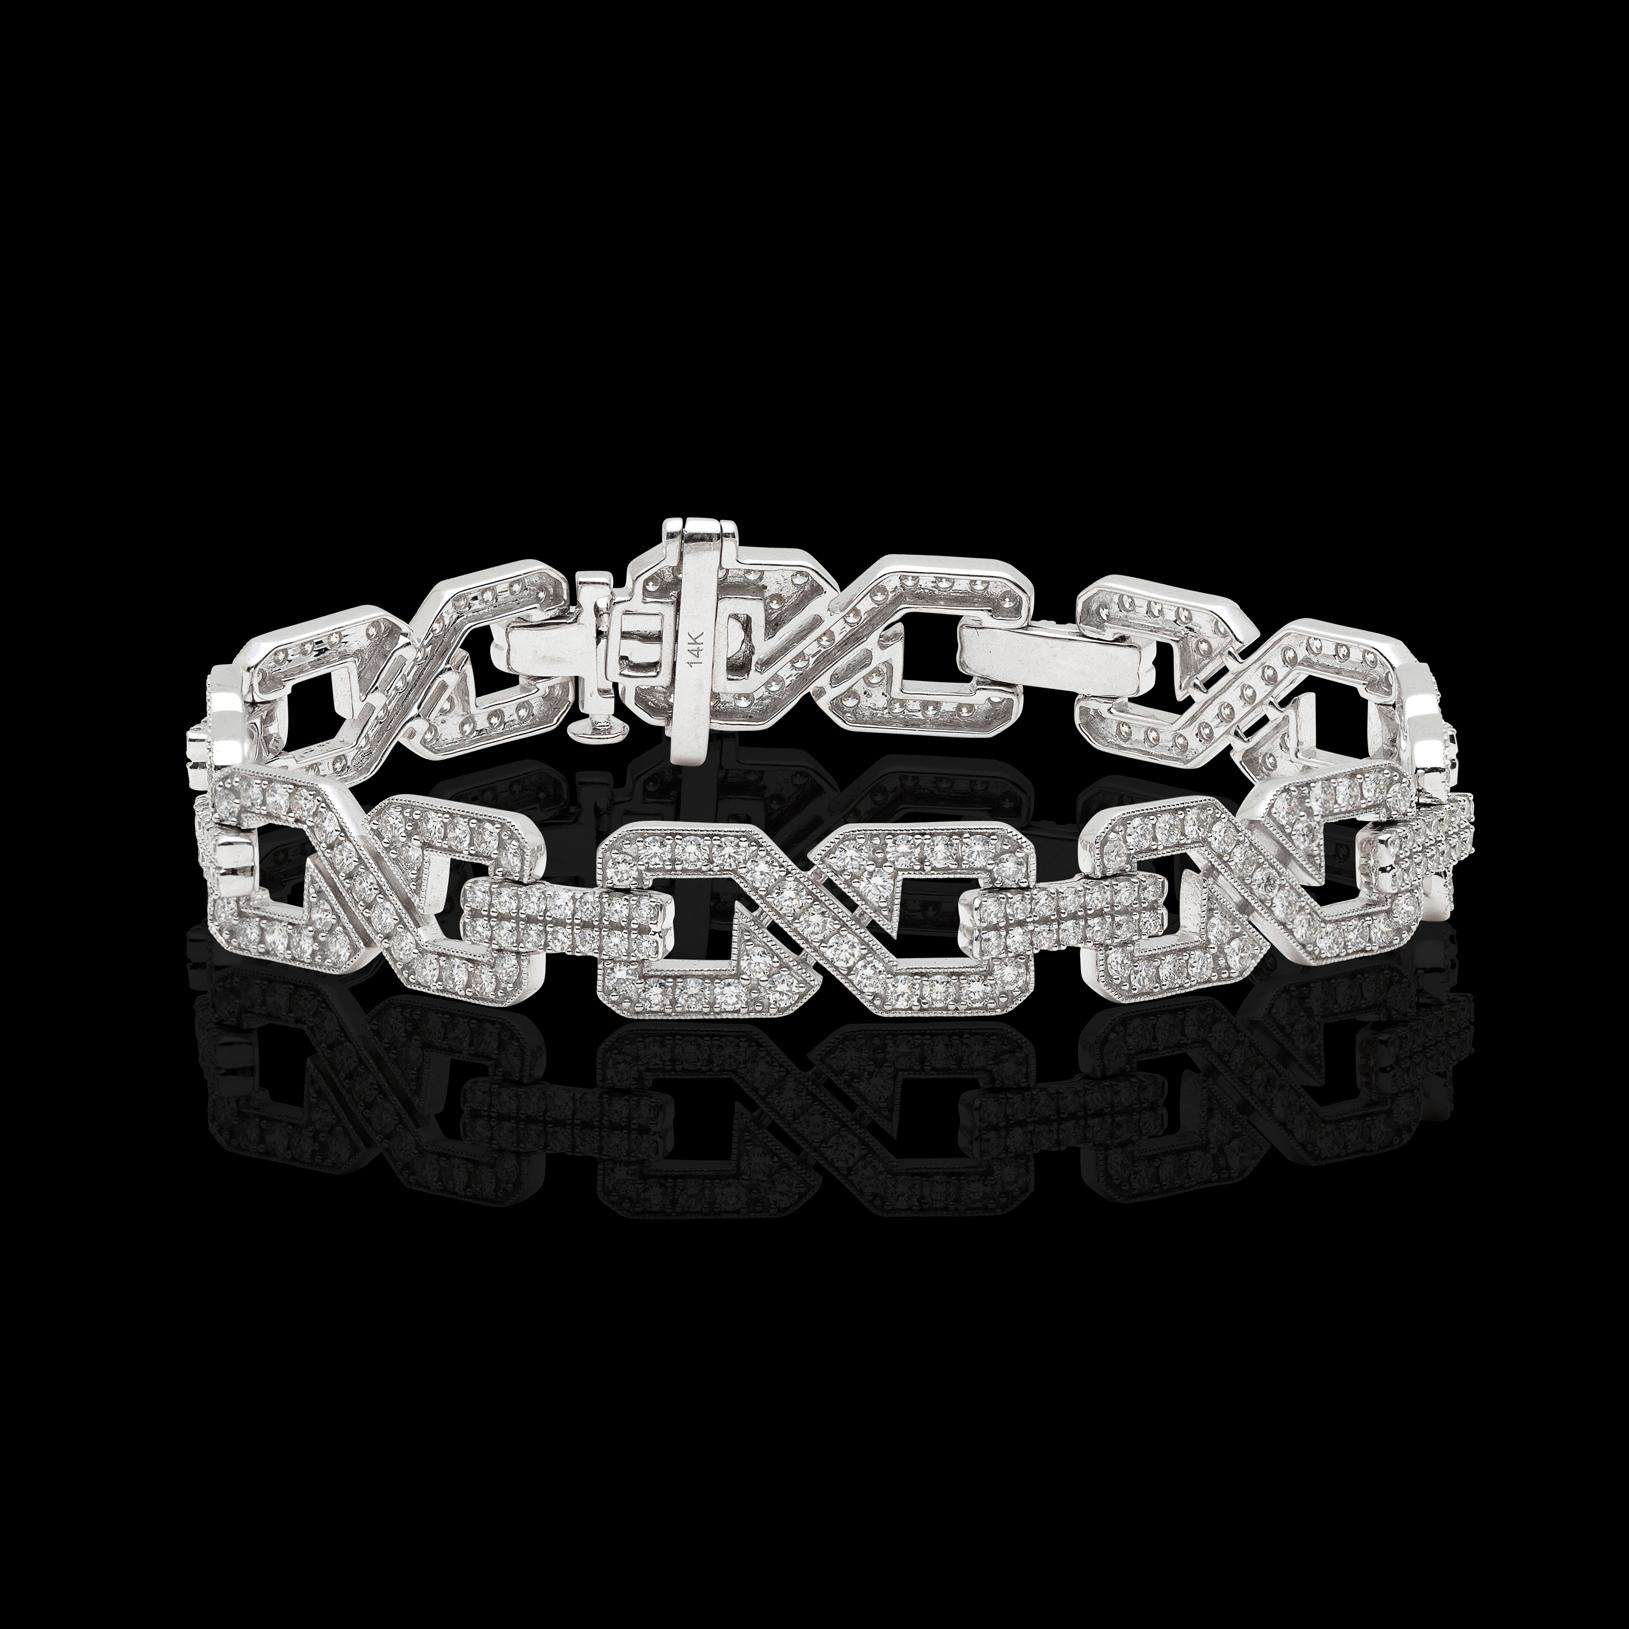 For the Art Deco style enthusiast! This 14k white gold link bracelet with geometric design is set throughout with round brilliant-cut diamonds weighing in total 3.99cts. The bracelet weighs 19.4 grams and is 7 1/4in. long, with a width of 3/8in. A